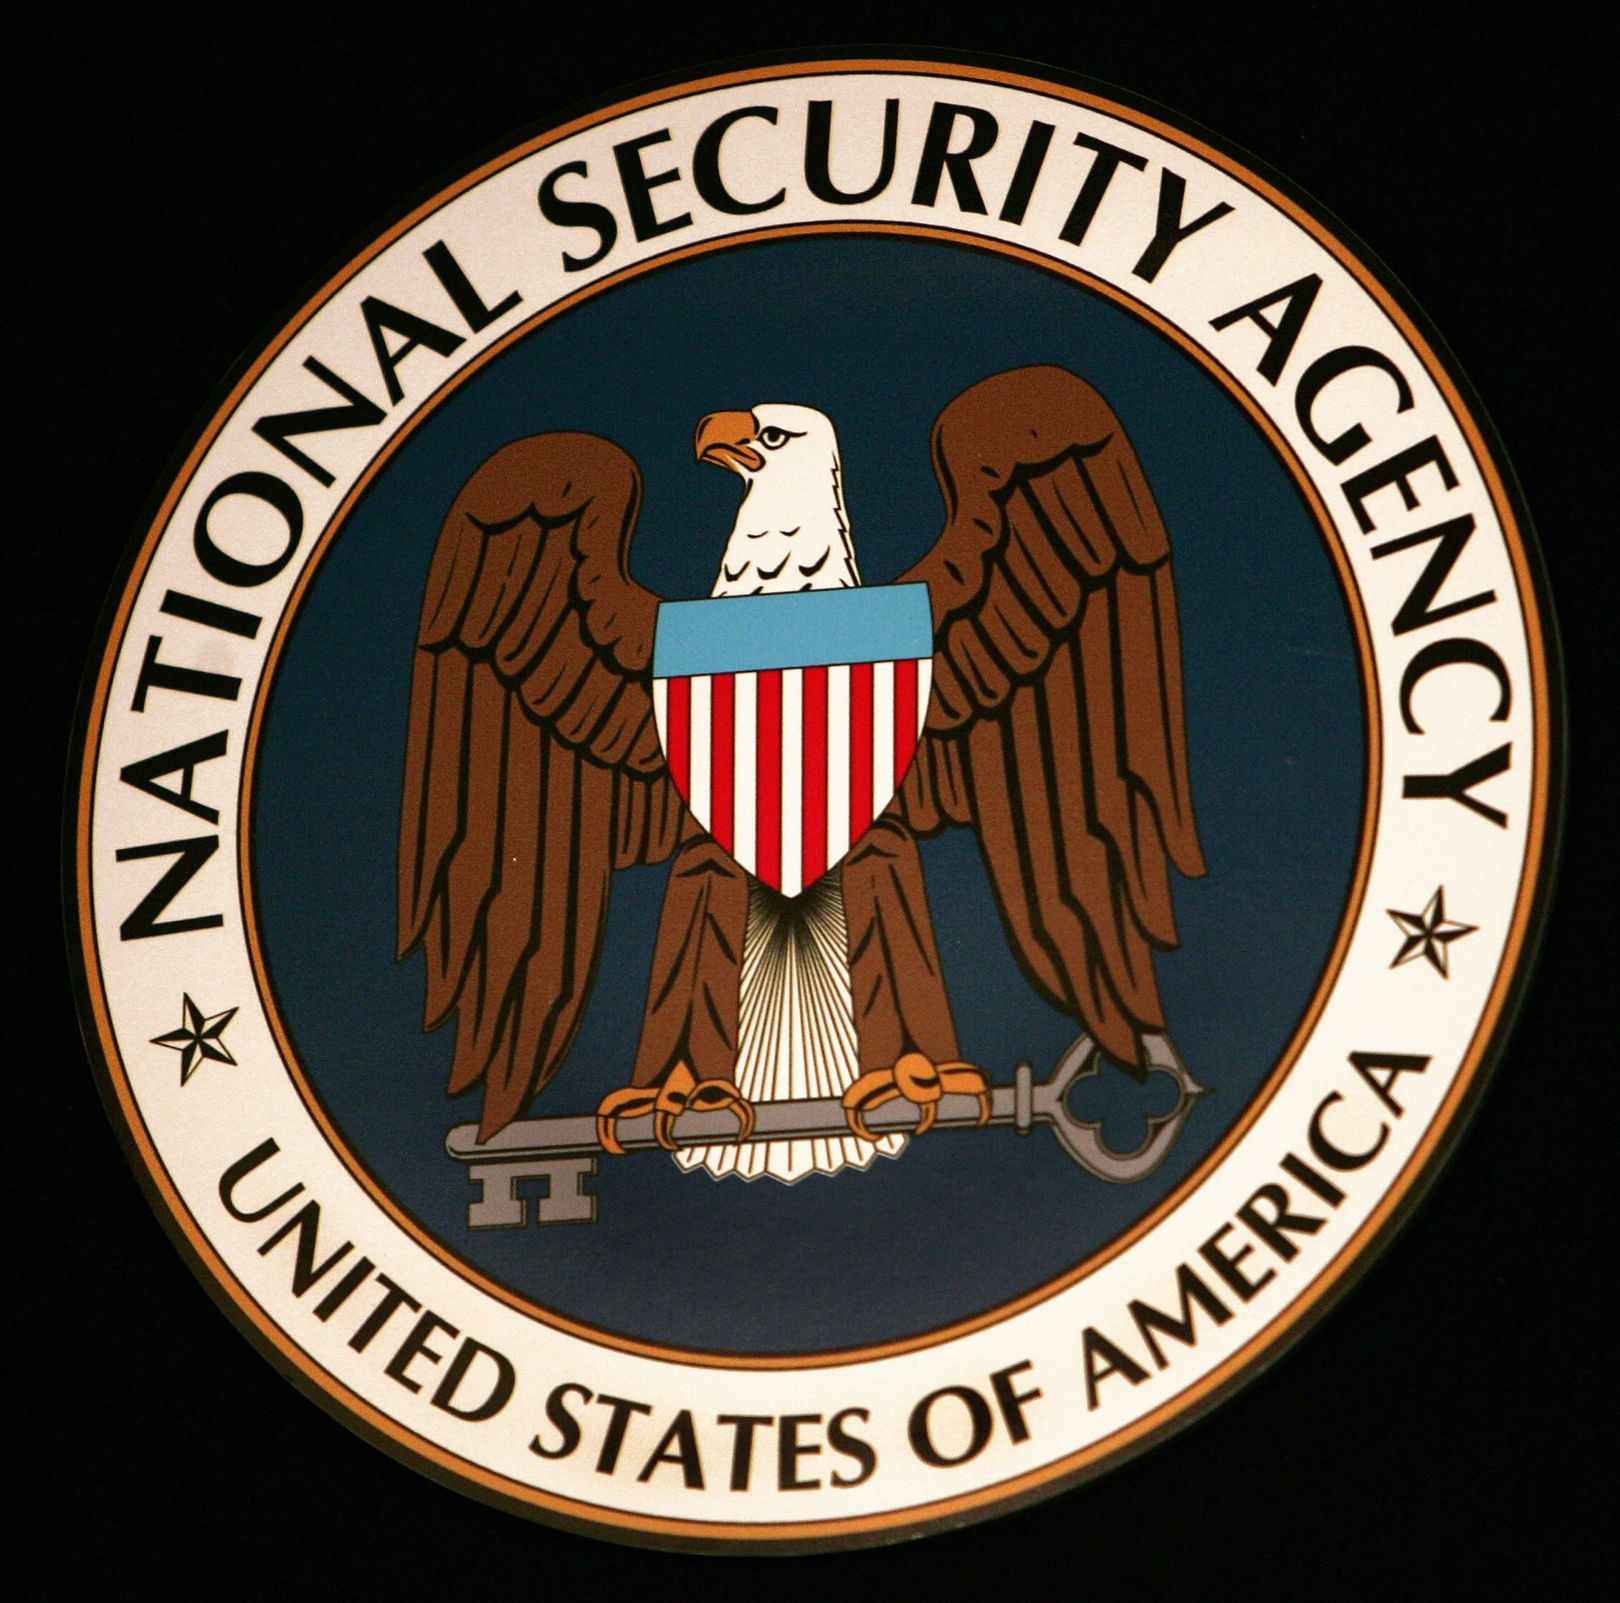 Hacking the hackers: everything you need to know about Shadow Brokers’ attack on the NSA